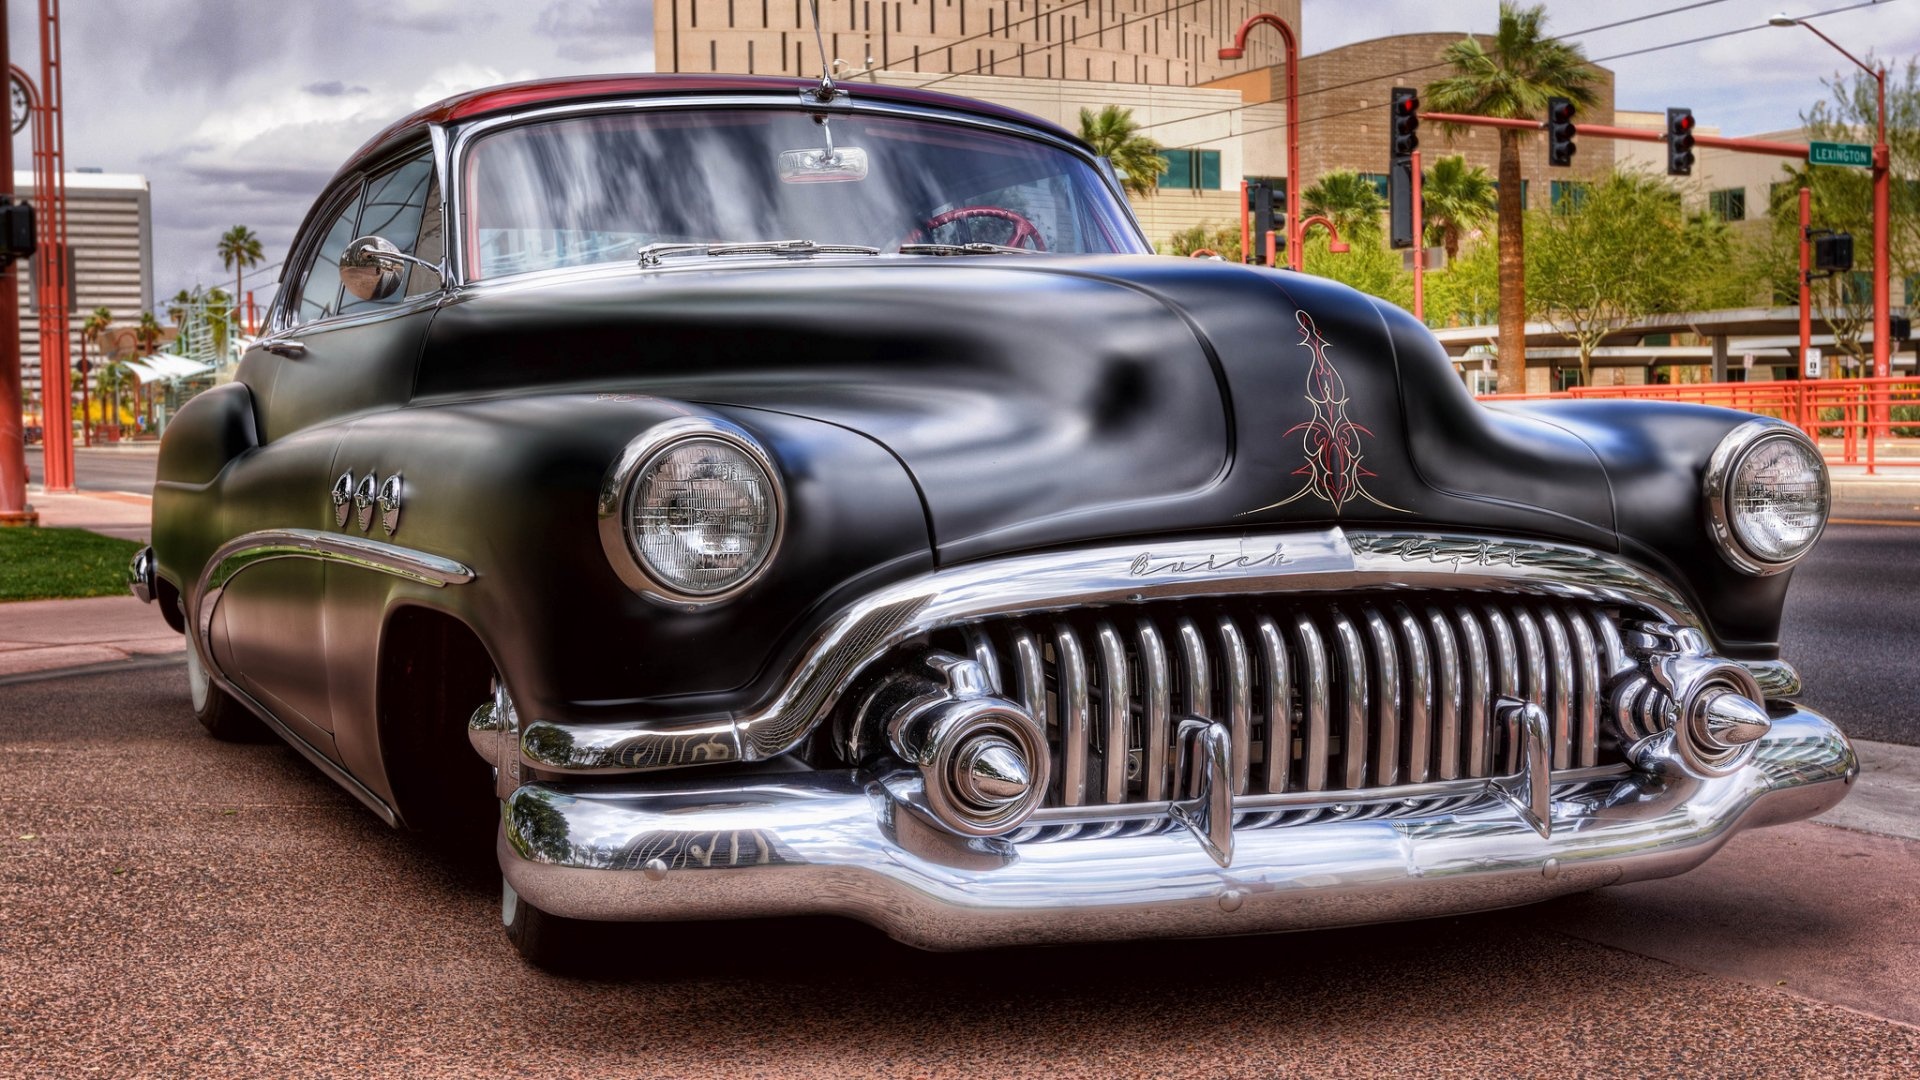 Buick cars, High definition wallpapers, Automotive backgrounds, 1920x1080 Full HD Desktop